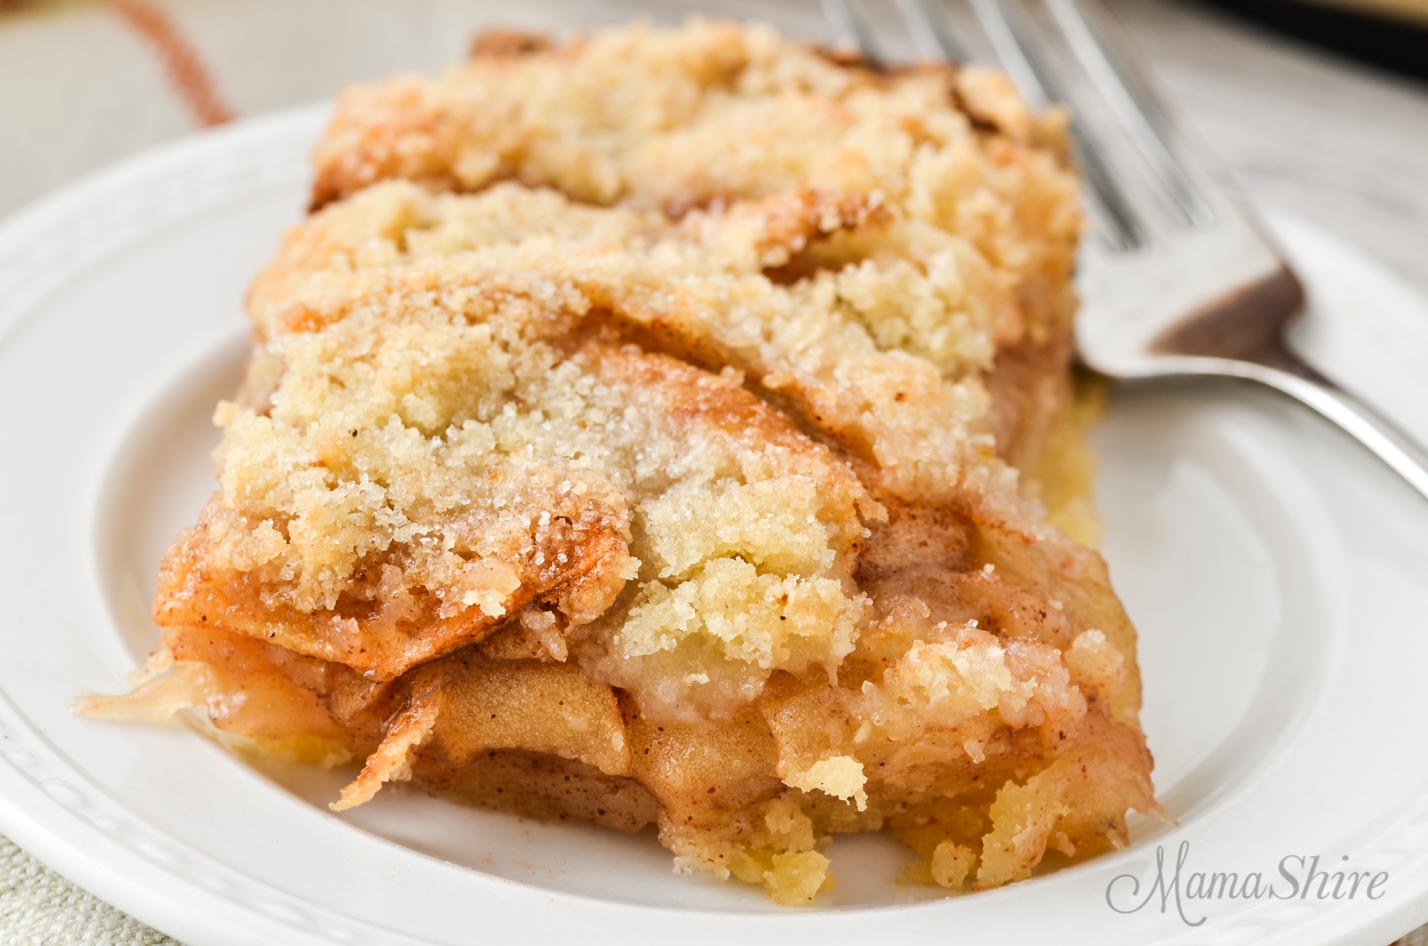 A slice of apple slab pie made with a gluten-free and dairy-free recipe.